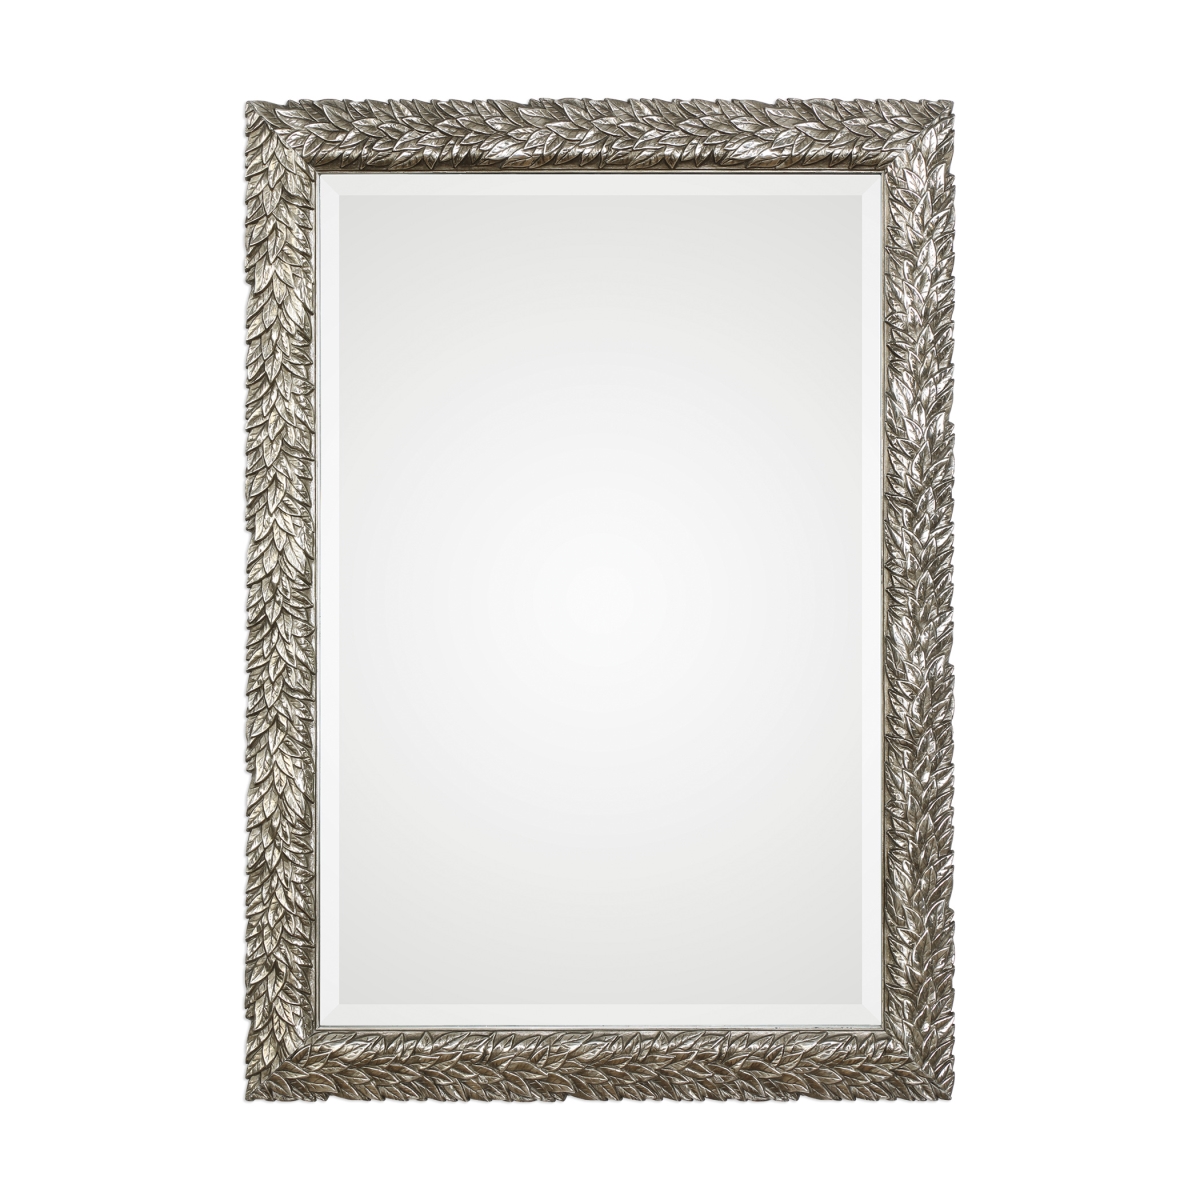 Picture of 212 Main 09359 Evelina Silver Leaves Mirror